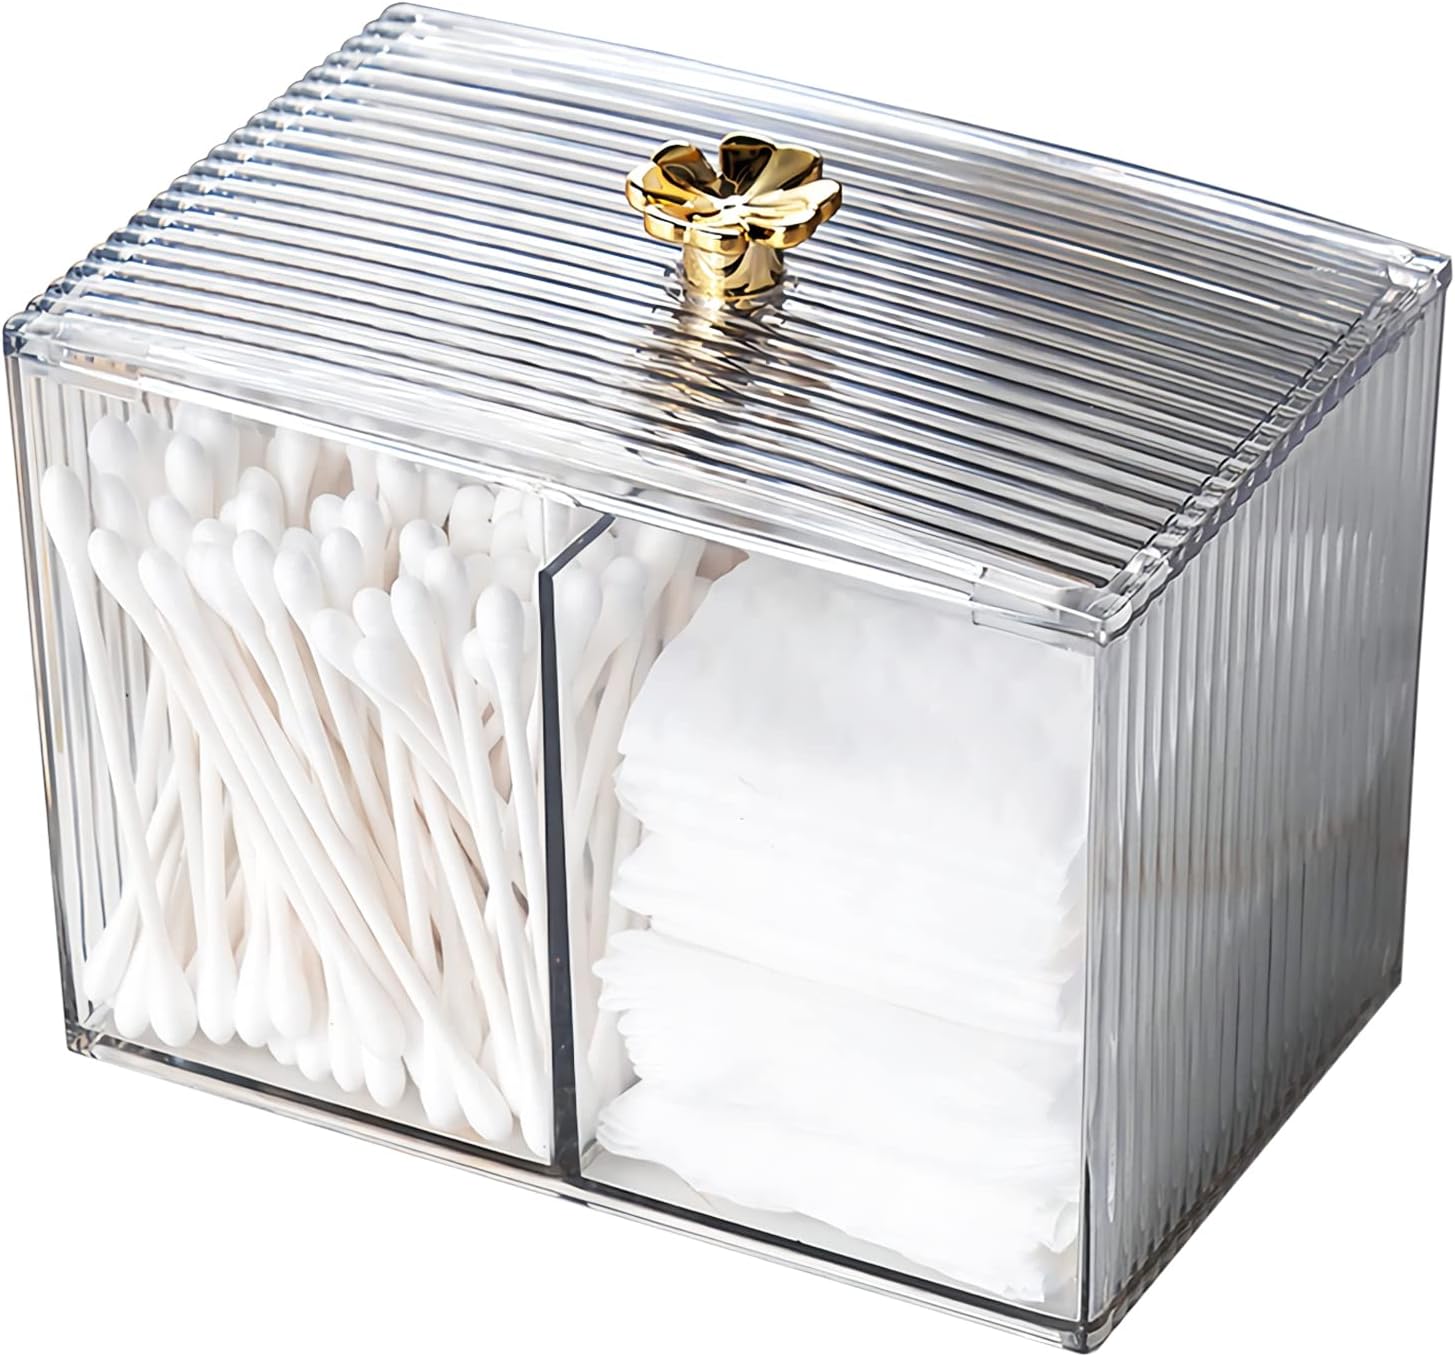 Acrylic cotton swab holder with organizer and transparent cover